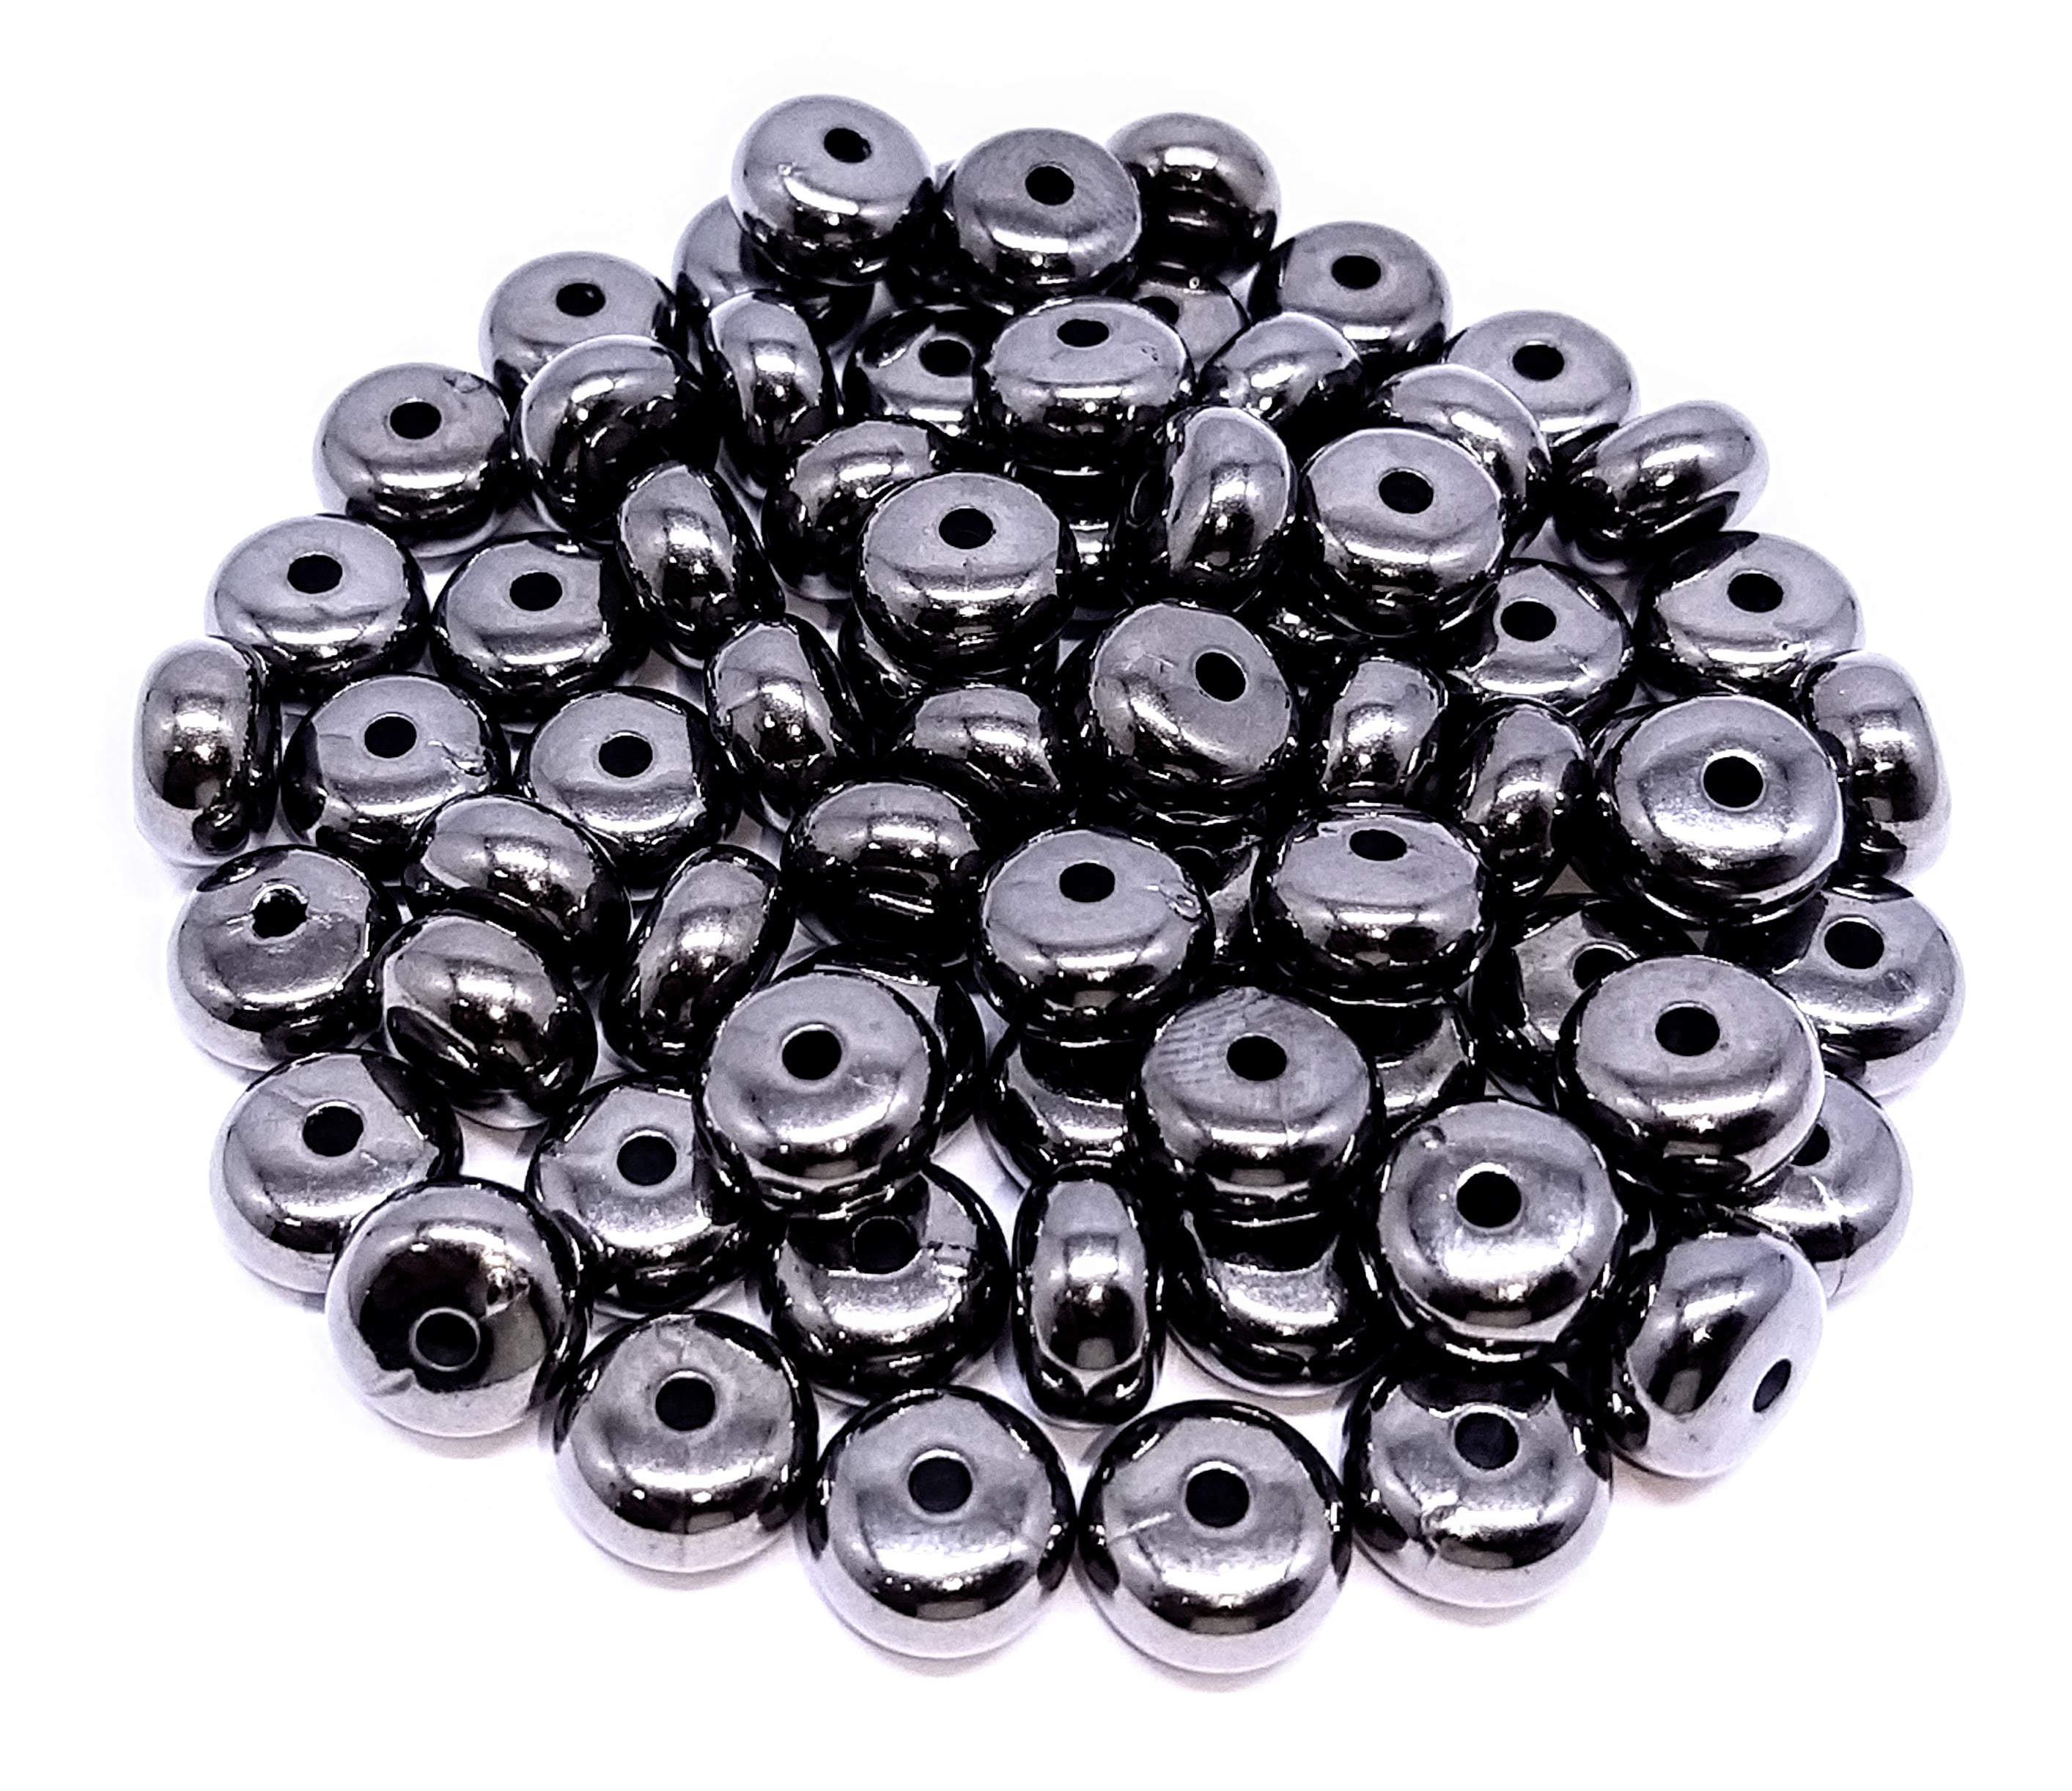 CONTA ABS 9,8MM X 5,6MM 